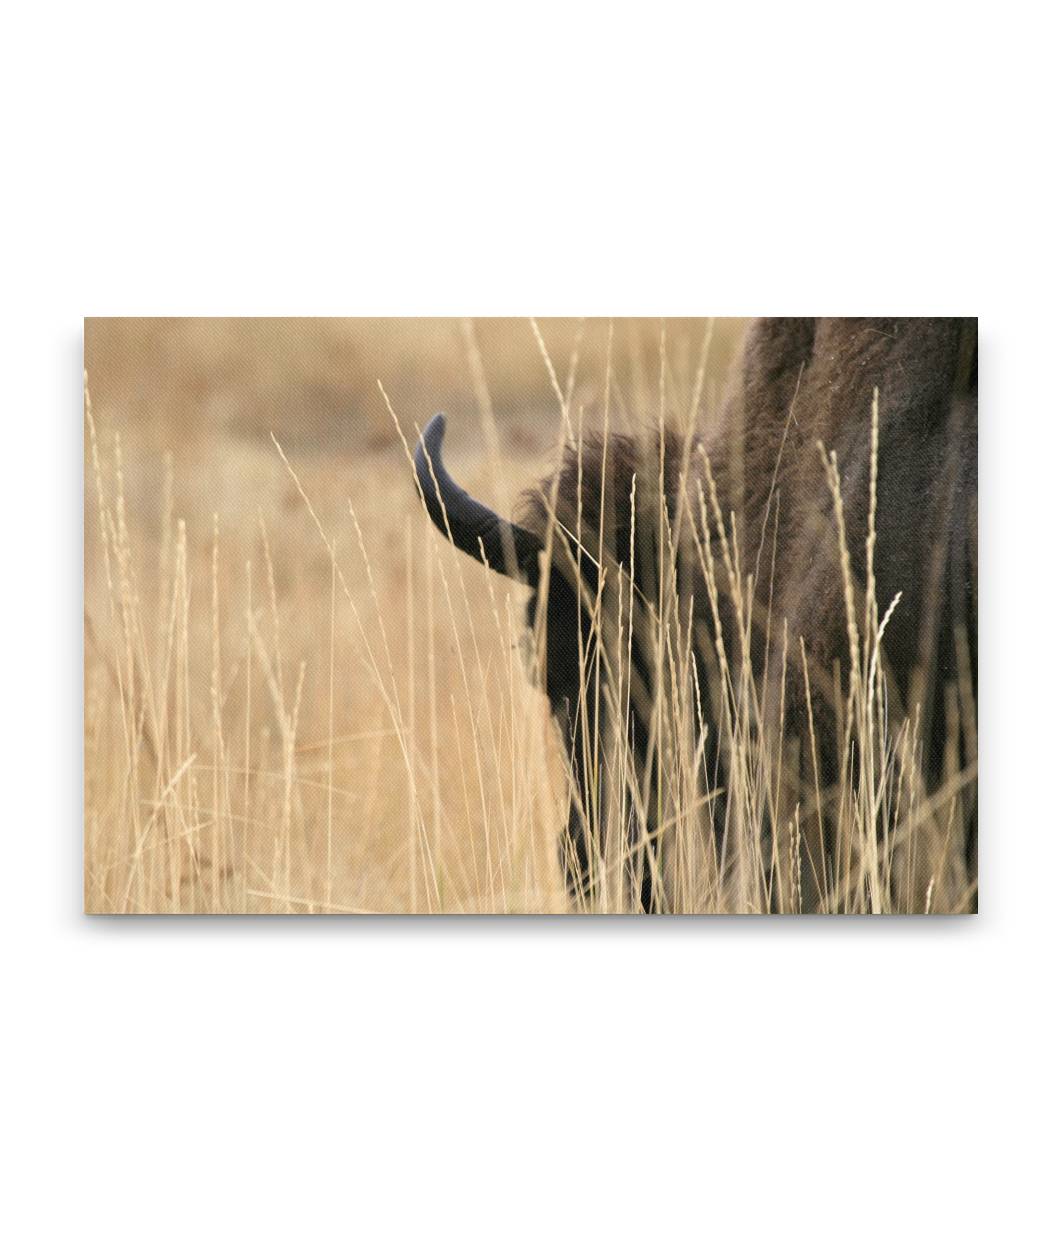 American bison in tall grass, National Bison Range, Montana